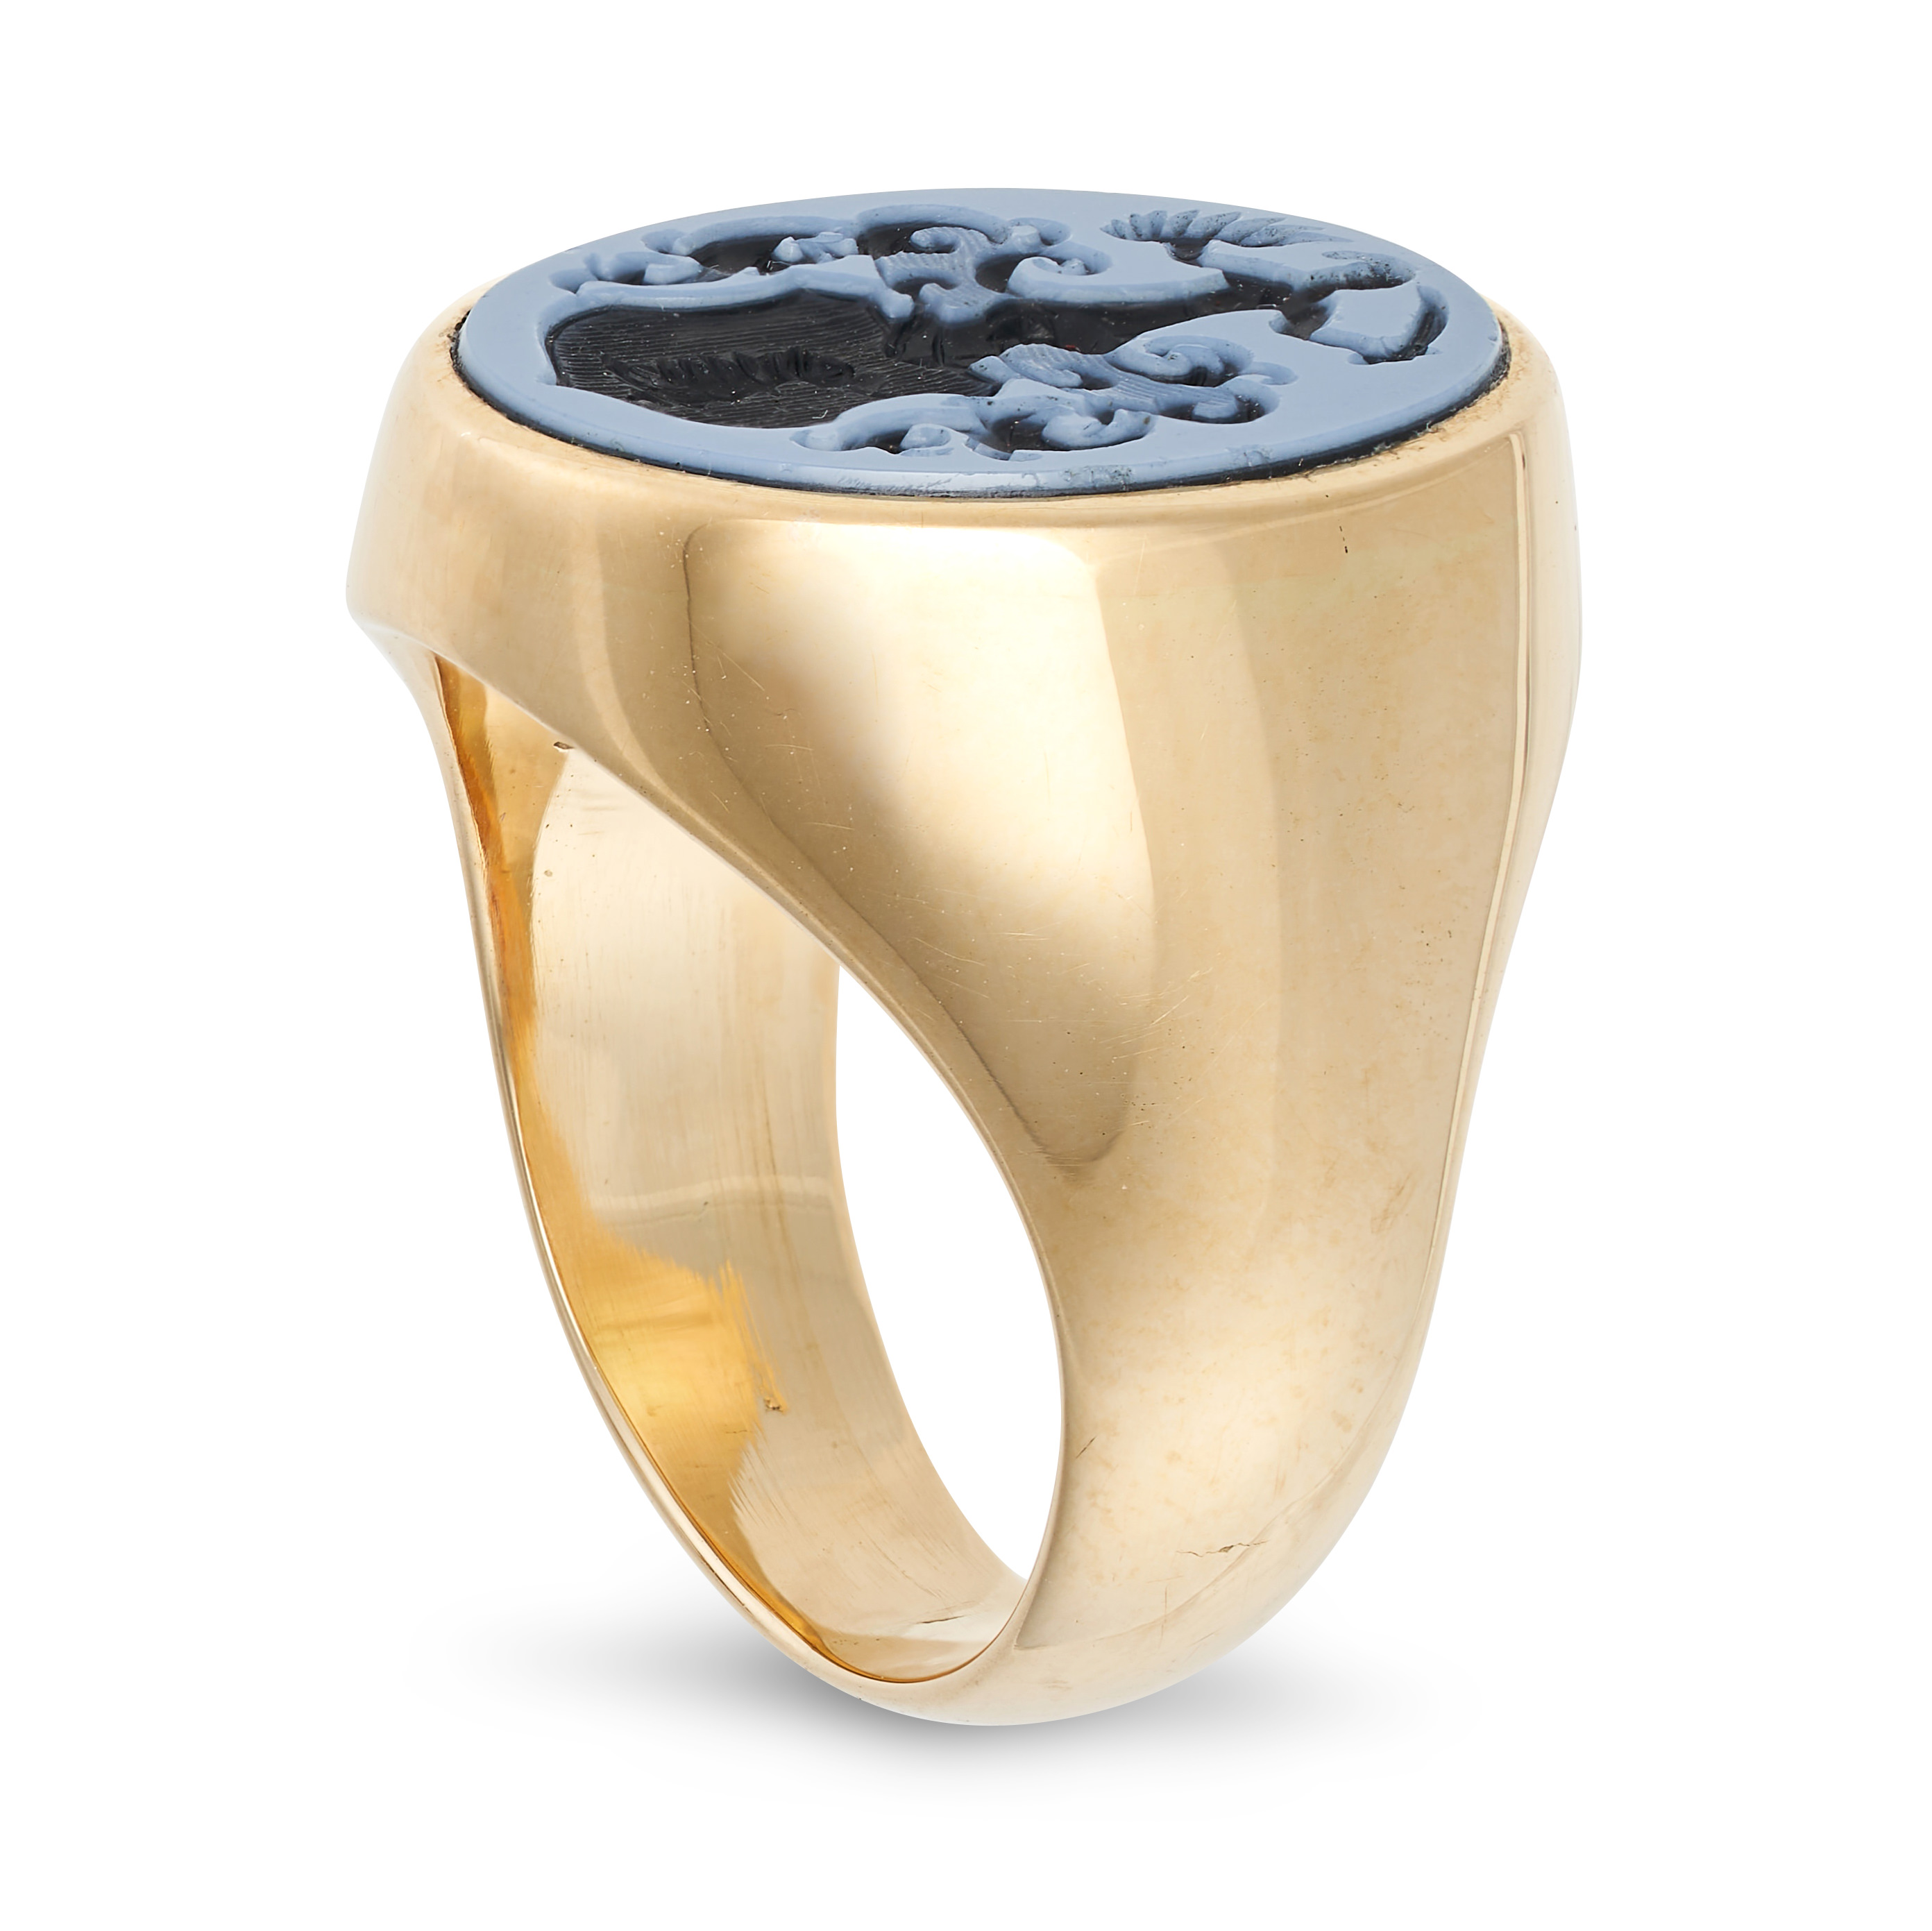 A SARDONYX INTAGLIO SIGNET RING in yellow gold, set with a sardonyx intaglio carevd with a family... - Image 2 of 2